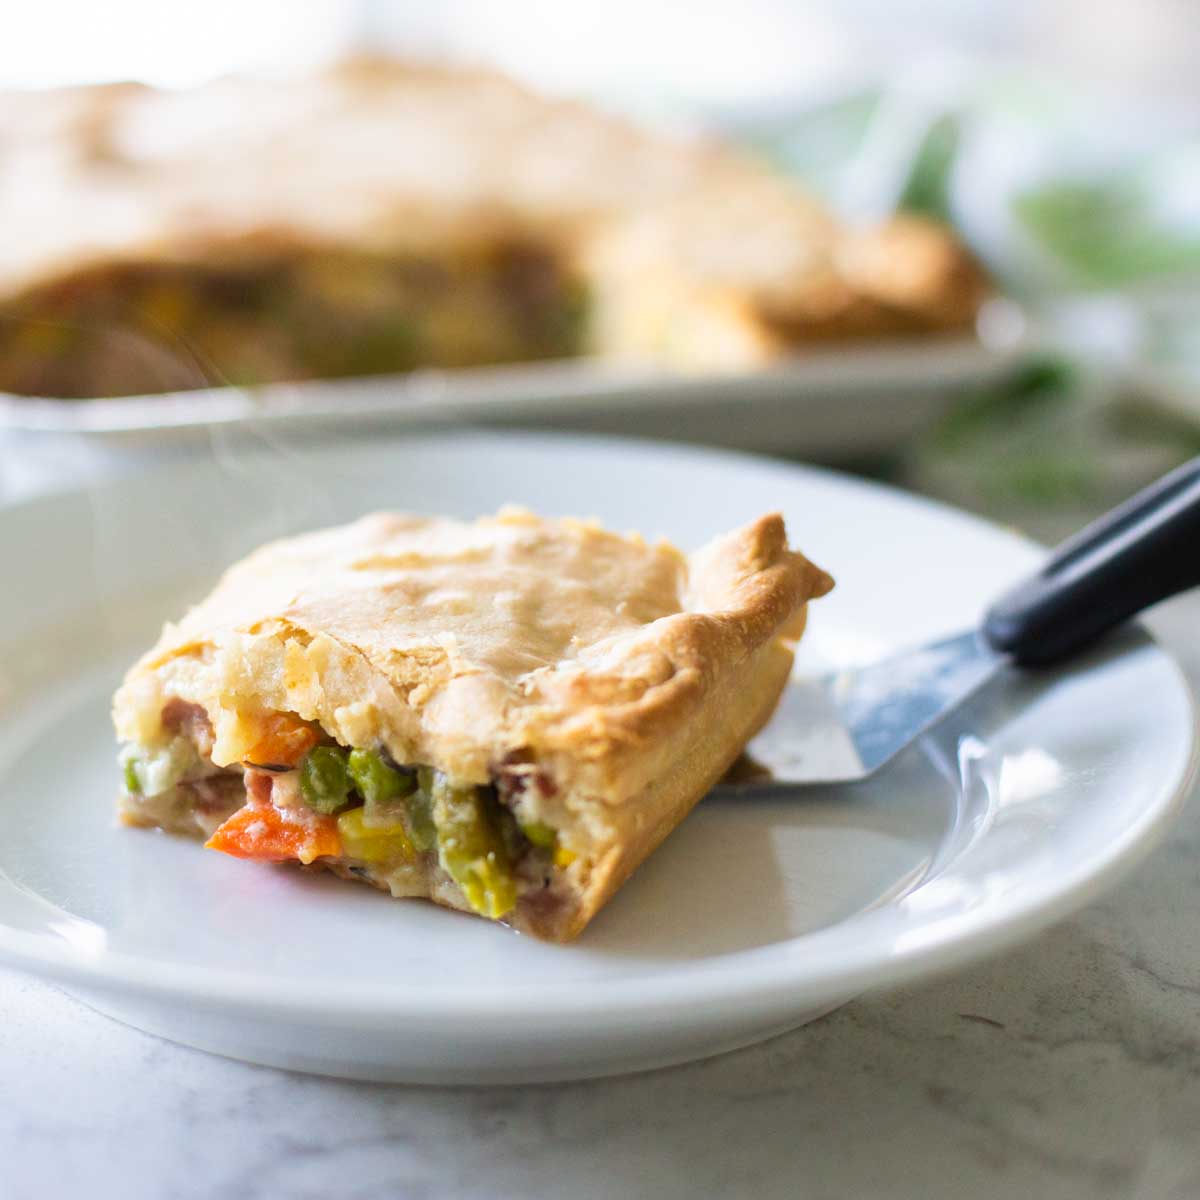 A slice of ham slab pot pie sits on a plate with a serving spatula. Big chunks of fresh veggies peek out from under a flaky pie crust.